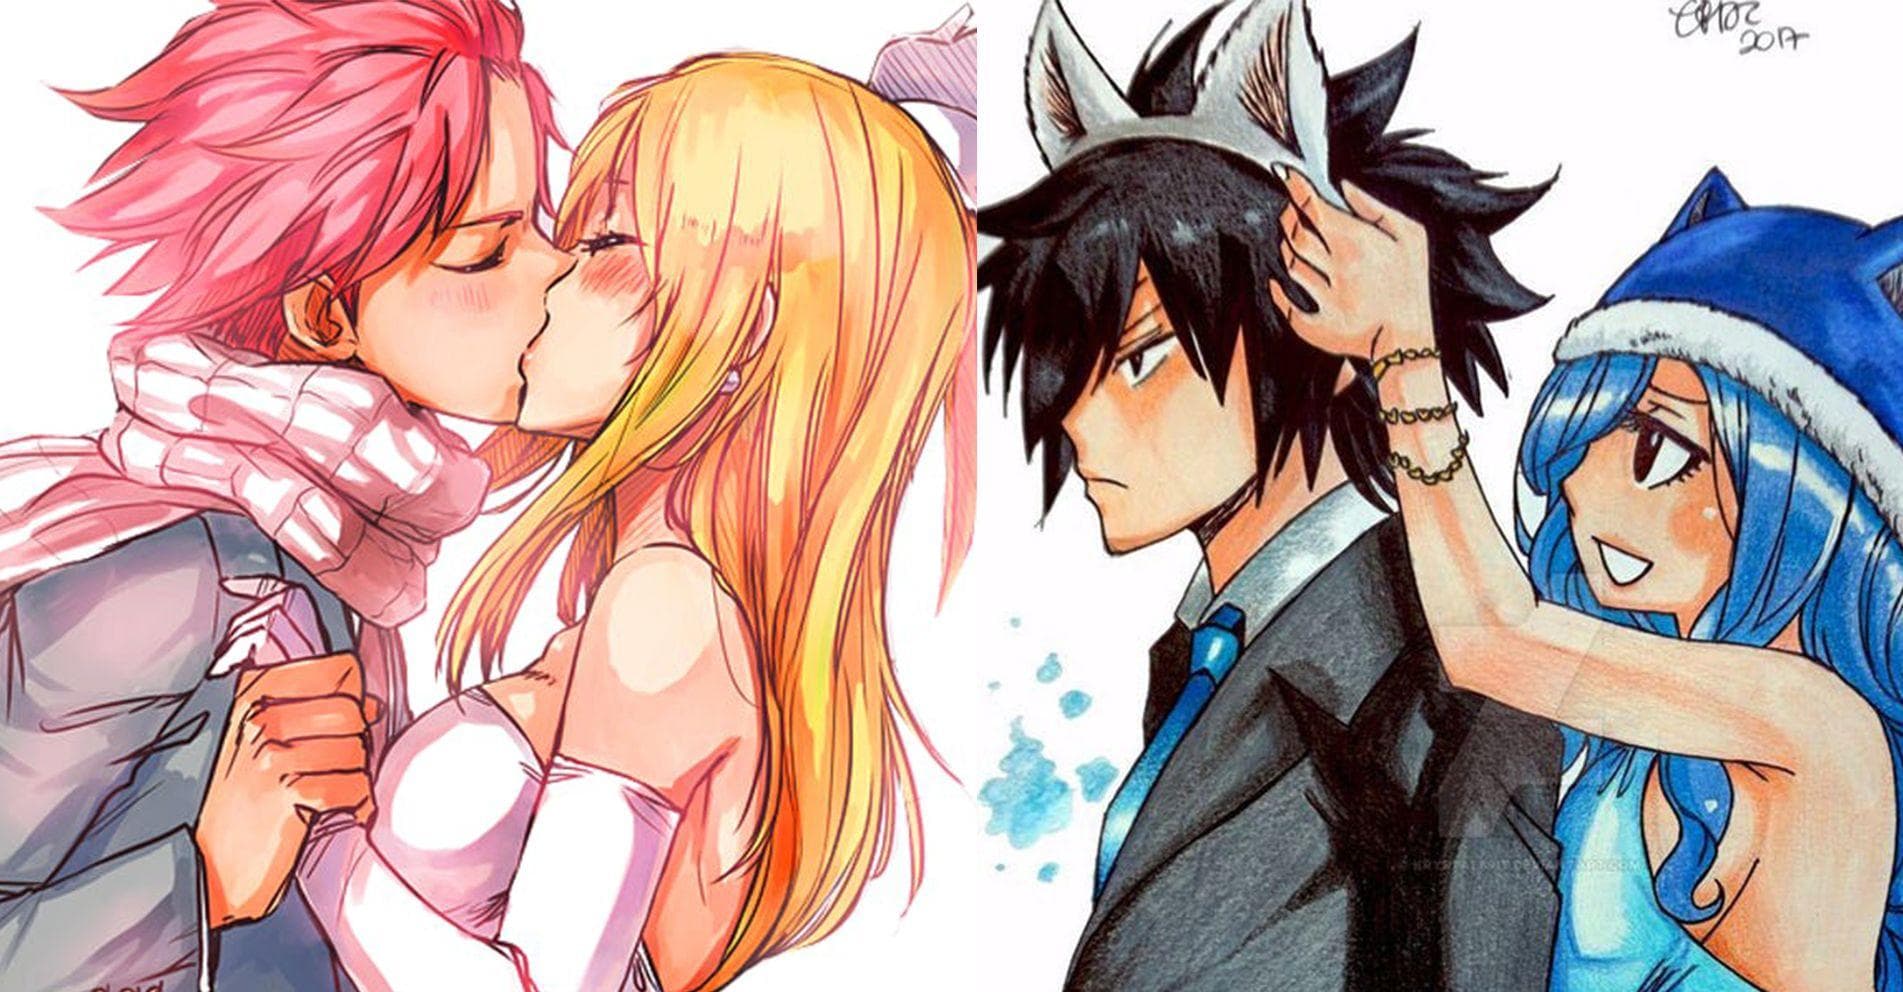 The 15 Most Powerful Magic Abilities In Fairy Tail Ranked - fairy tail celestial spirit magic roblox